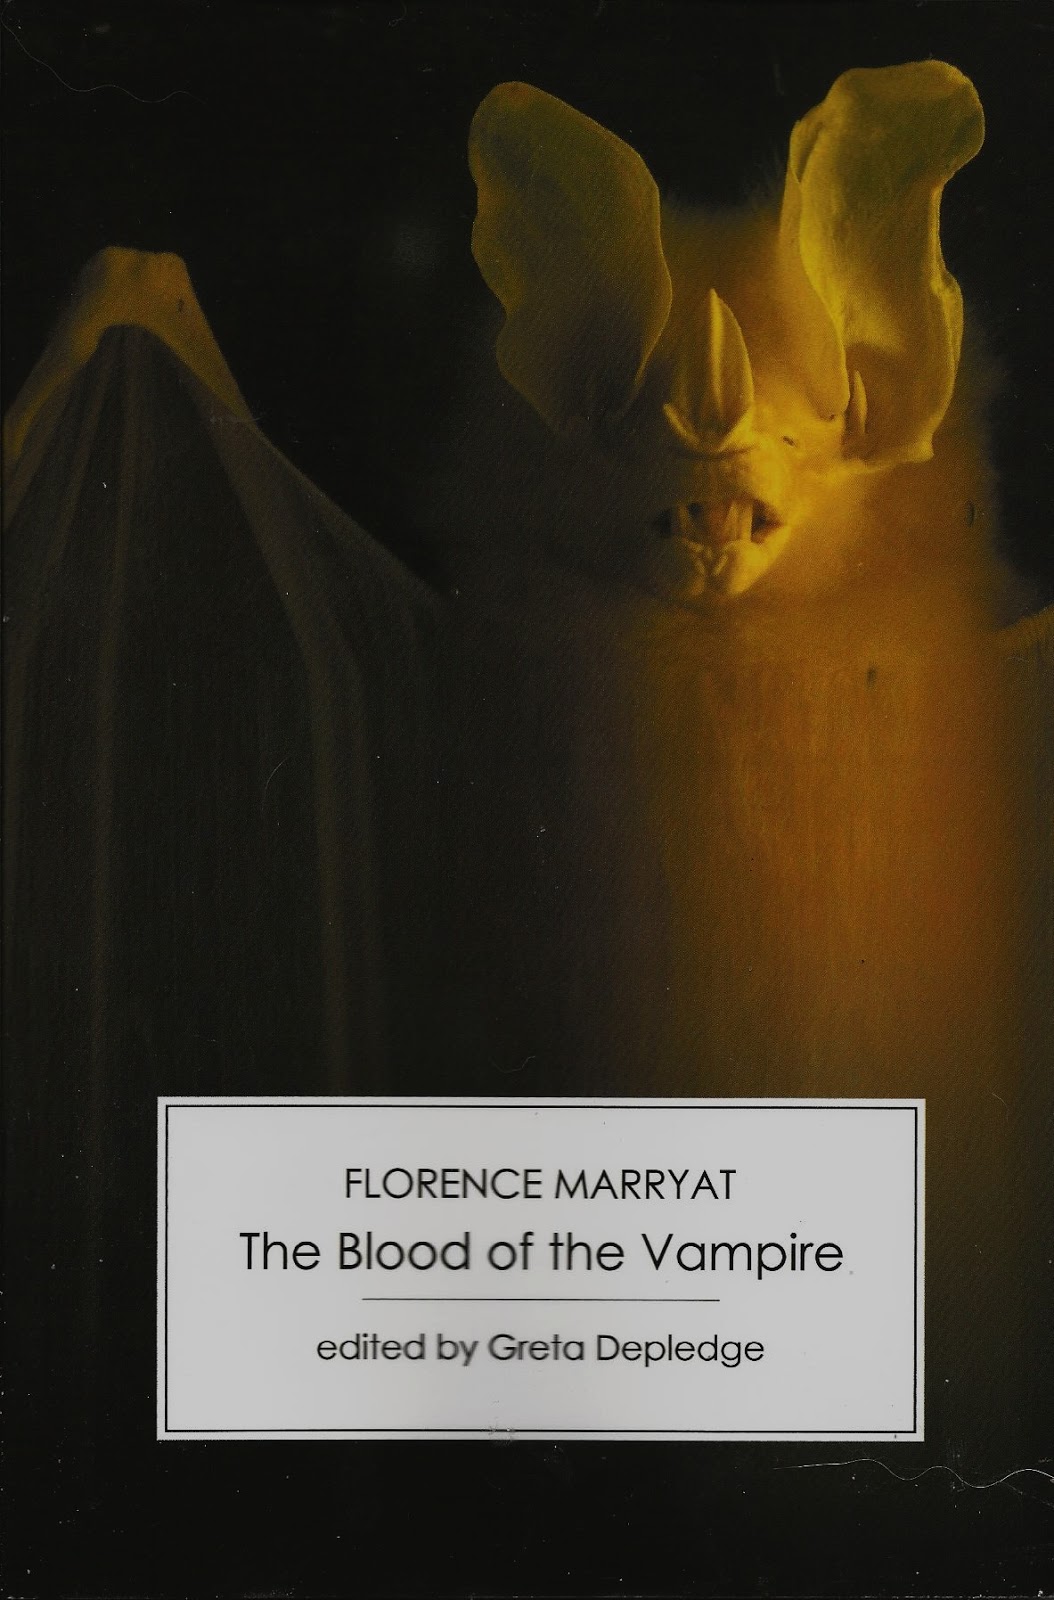 Taliesin meets the vampires: Classic Literature: Blood of the Vampire